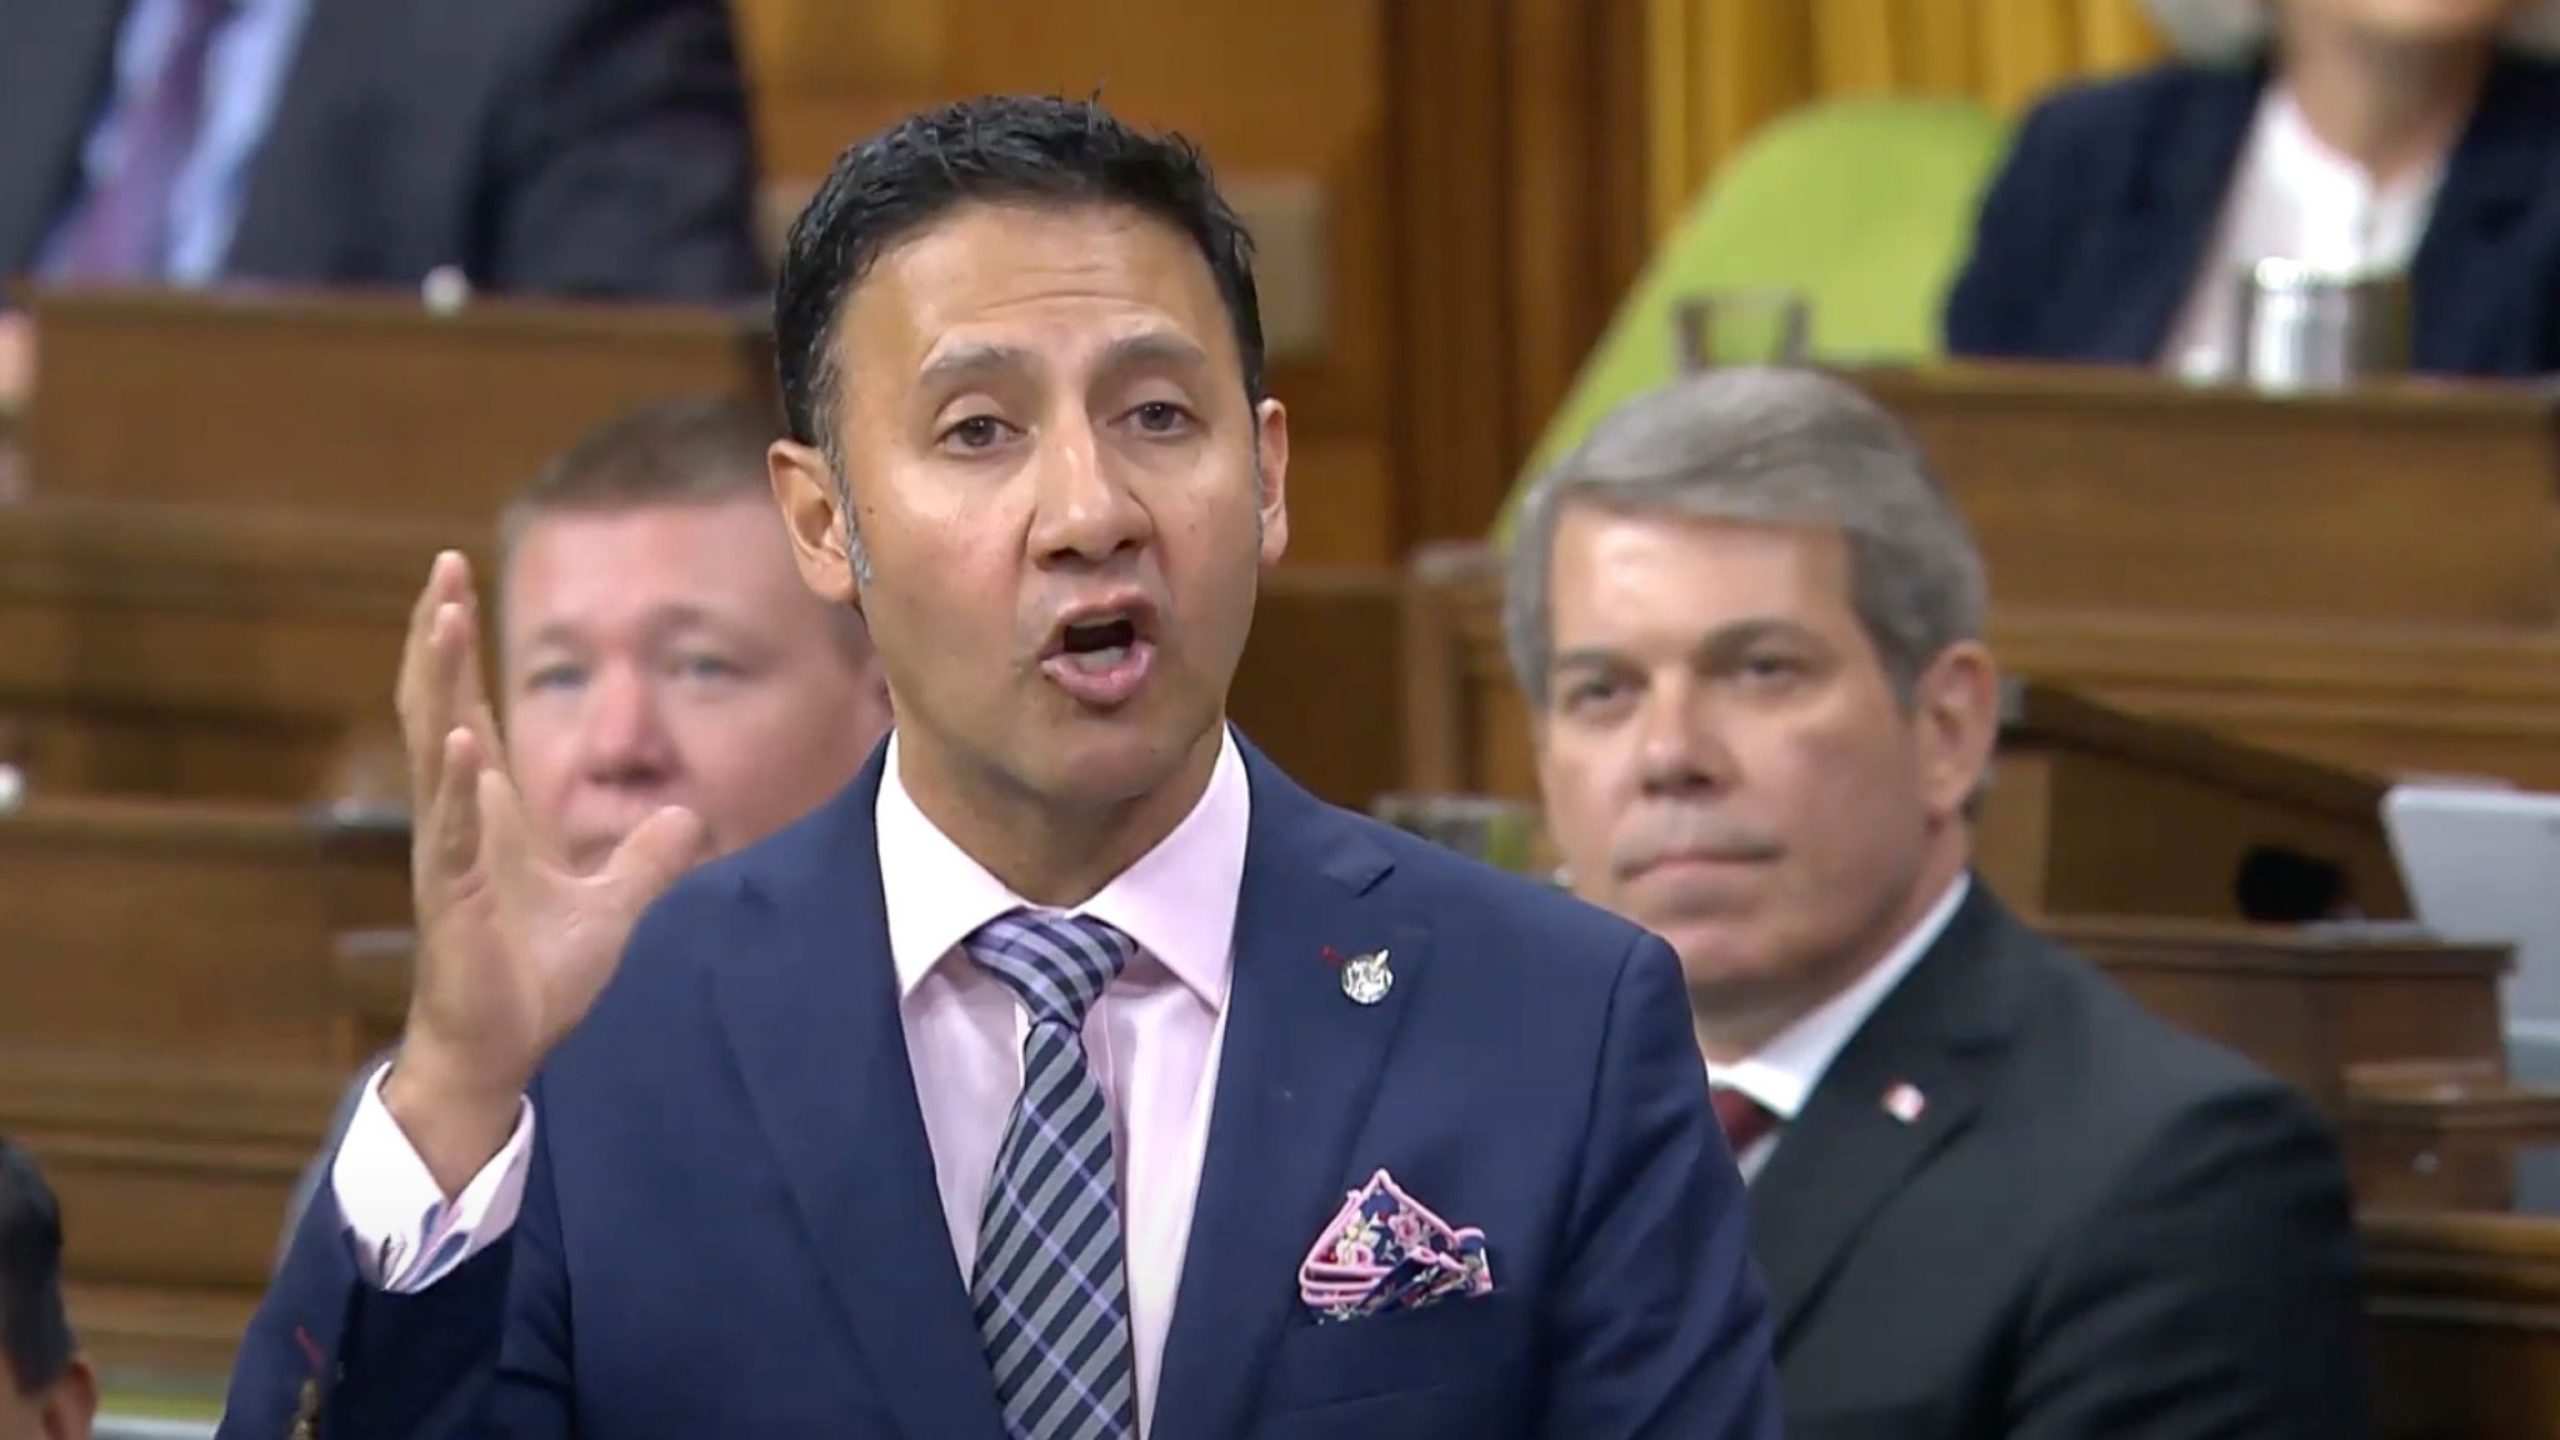 Pre-Crime: Canada’s Justice Minister Defends “Online Harms Bill” Powers To Place People Under House Arrest, Cut Internet Access